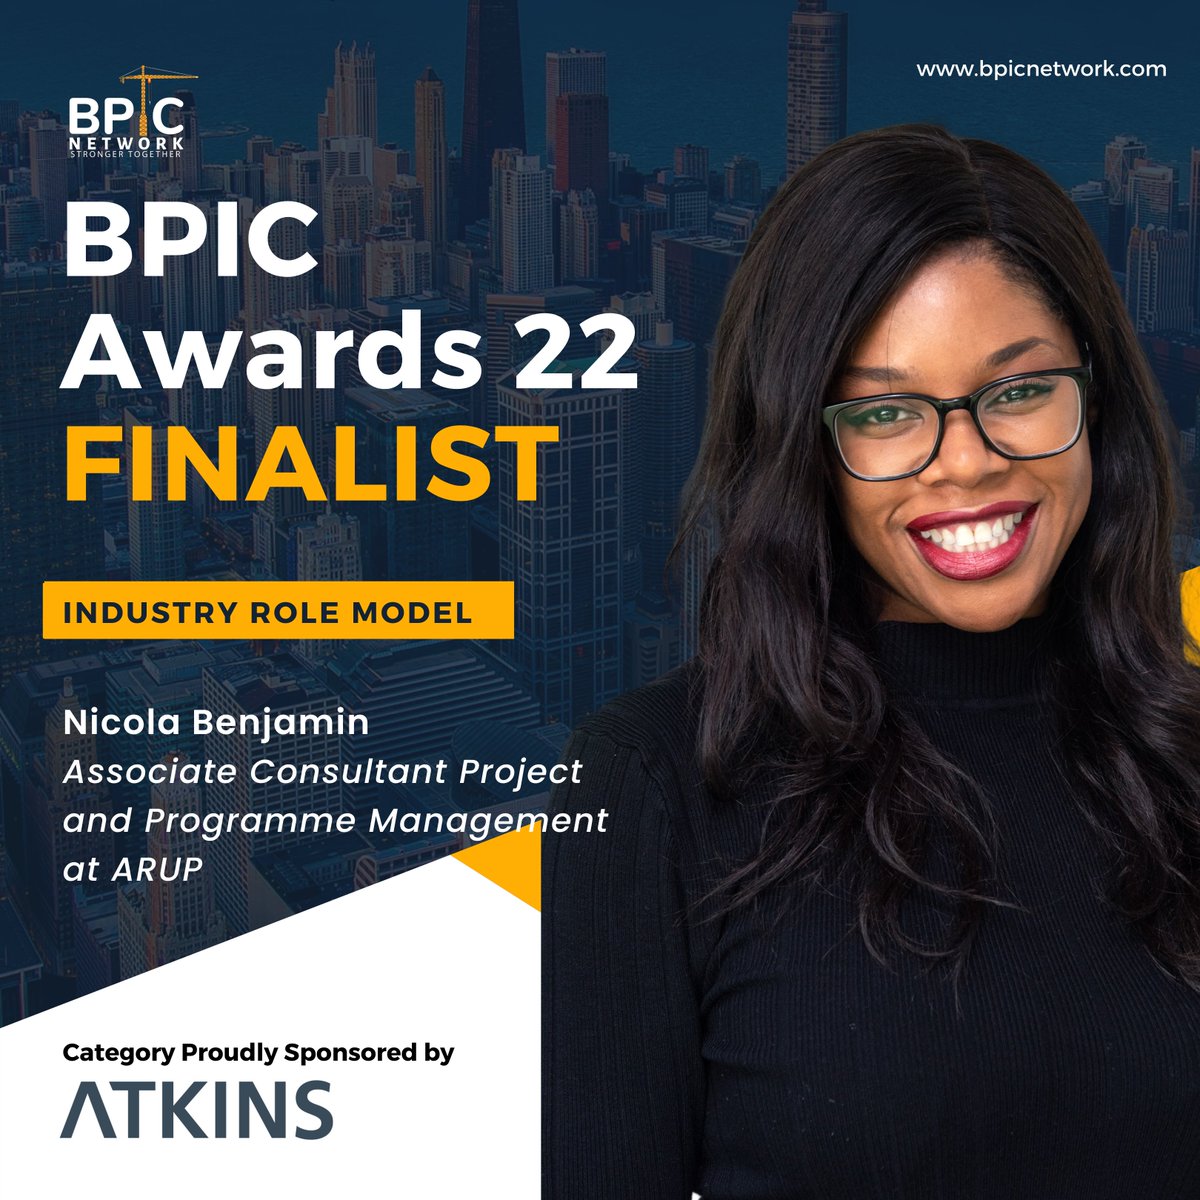 Amazing to see Nicola Benjamin shortlisted in this year’s @BpicNetwork awards! A true role model consistently working to increase the #diversity of the programme management industry and create lasting change.